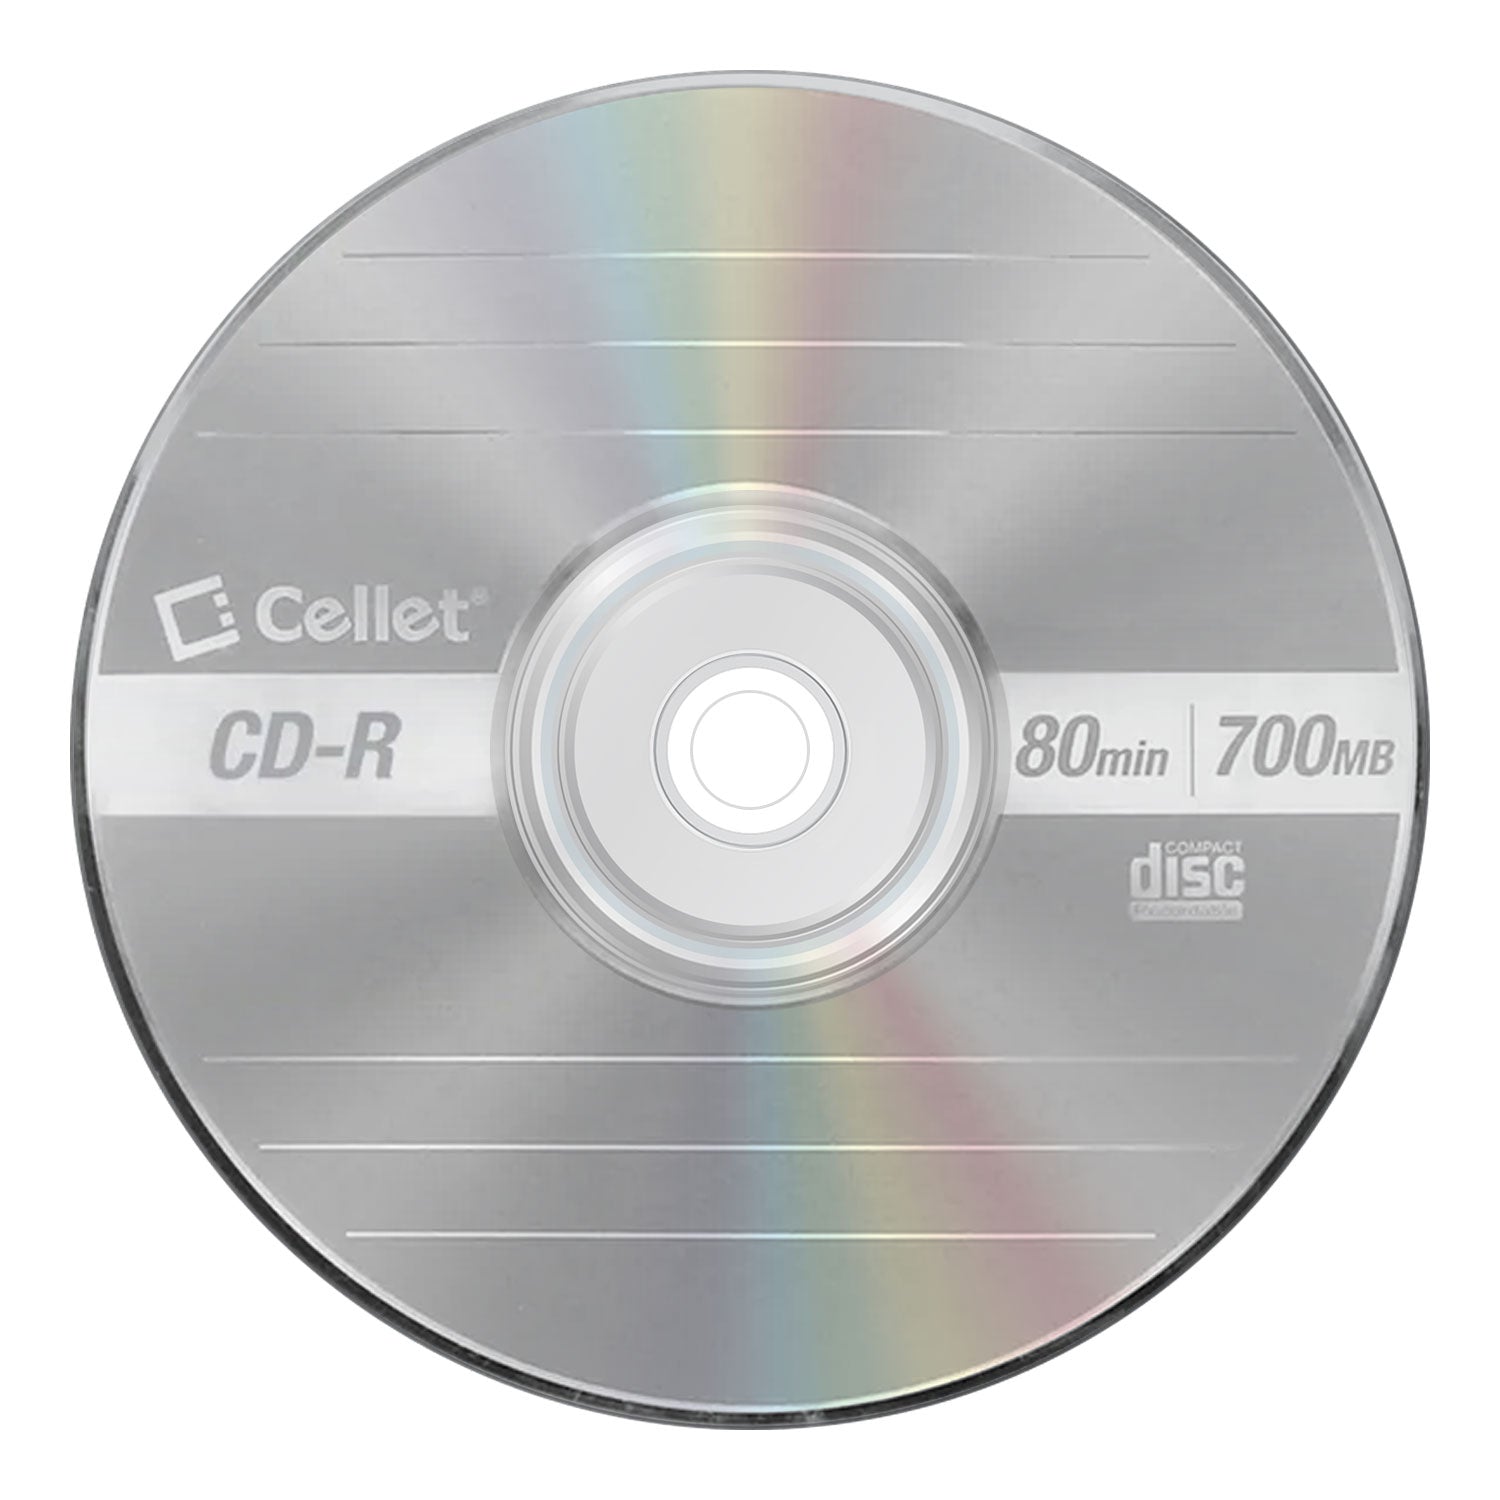 Cellet 5-Pack 700MB 80 Min for Data, Music, Photos